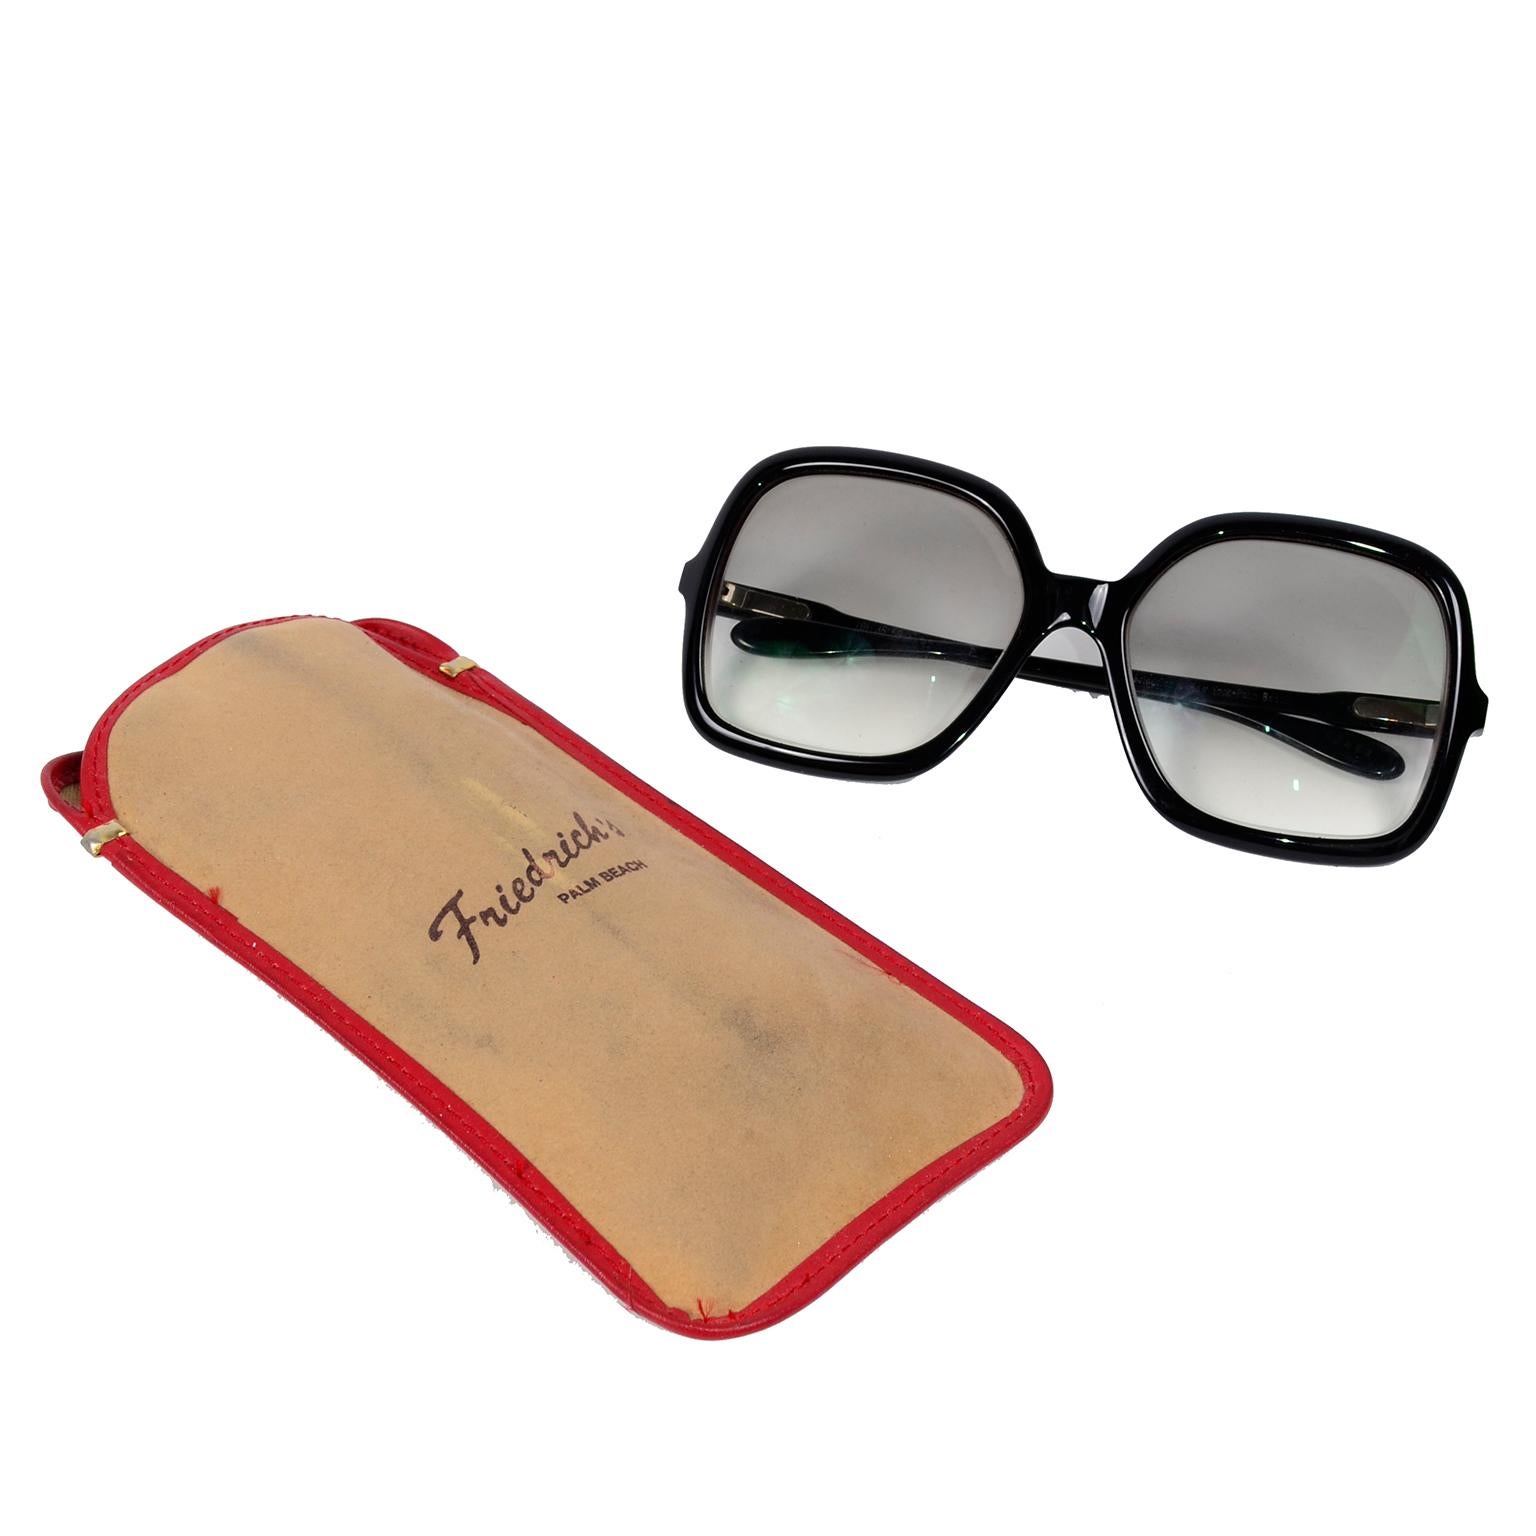 These are really great, very well made oversized vintage sunglasses by Friedrich's of Palm Beach with the original case and dust cloth. They are large squares, almost butterfly shaped sunglasses. The thin arms taper from the front, and are straight